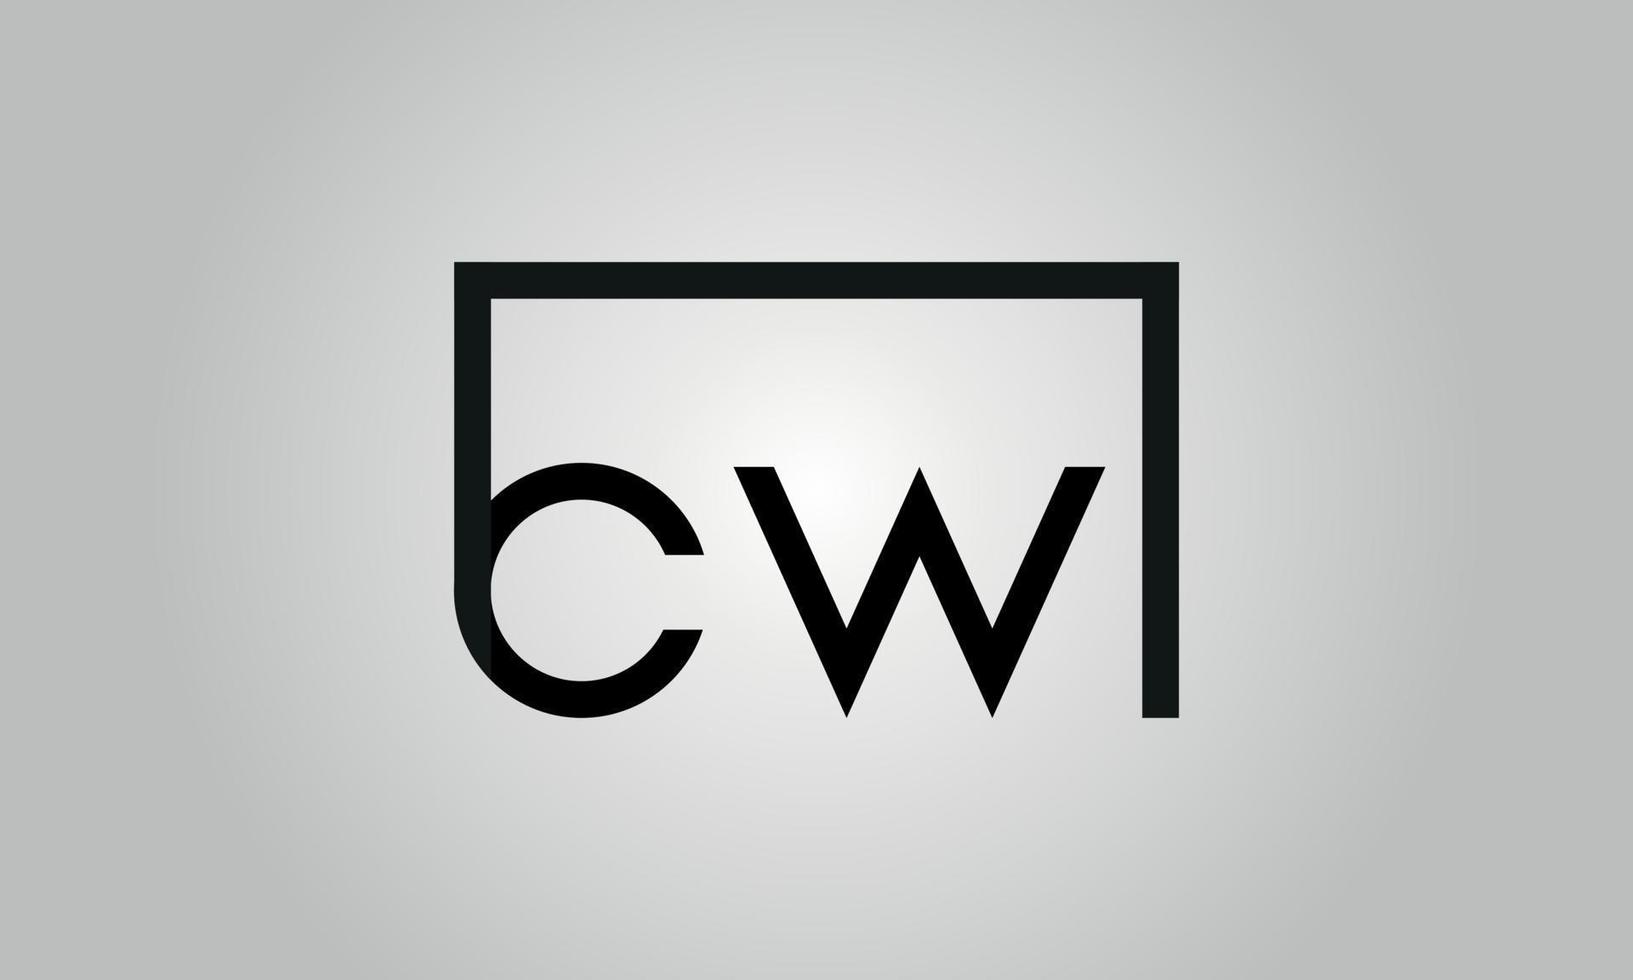 Letter CW logo design. CW logo with square shape in black colors vector free vector template.